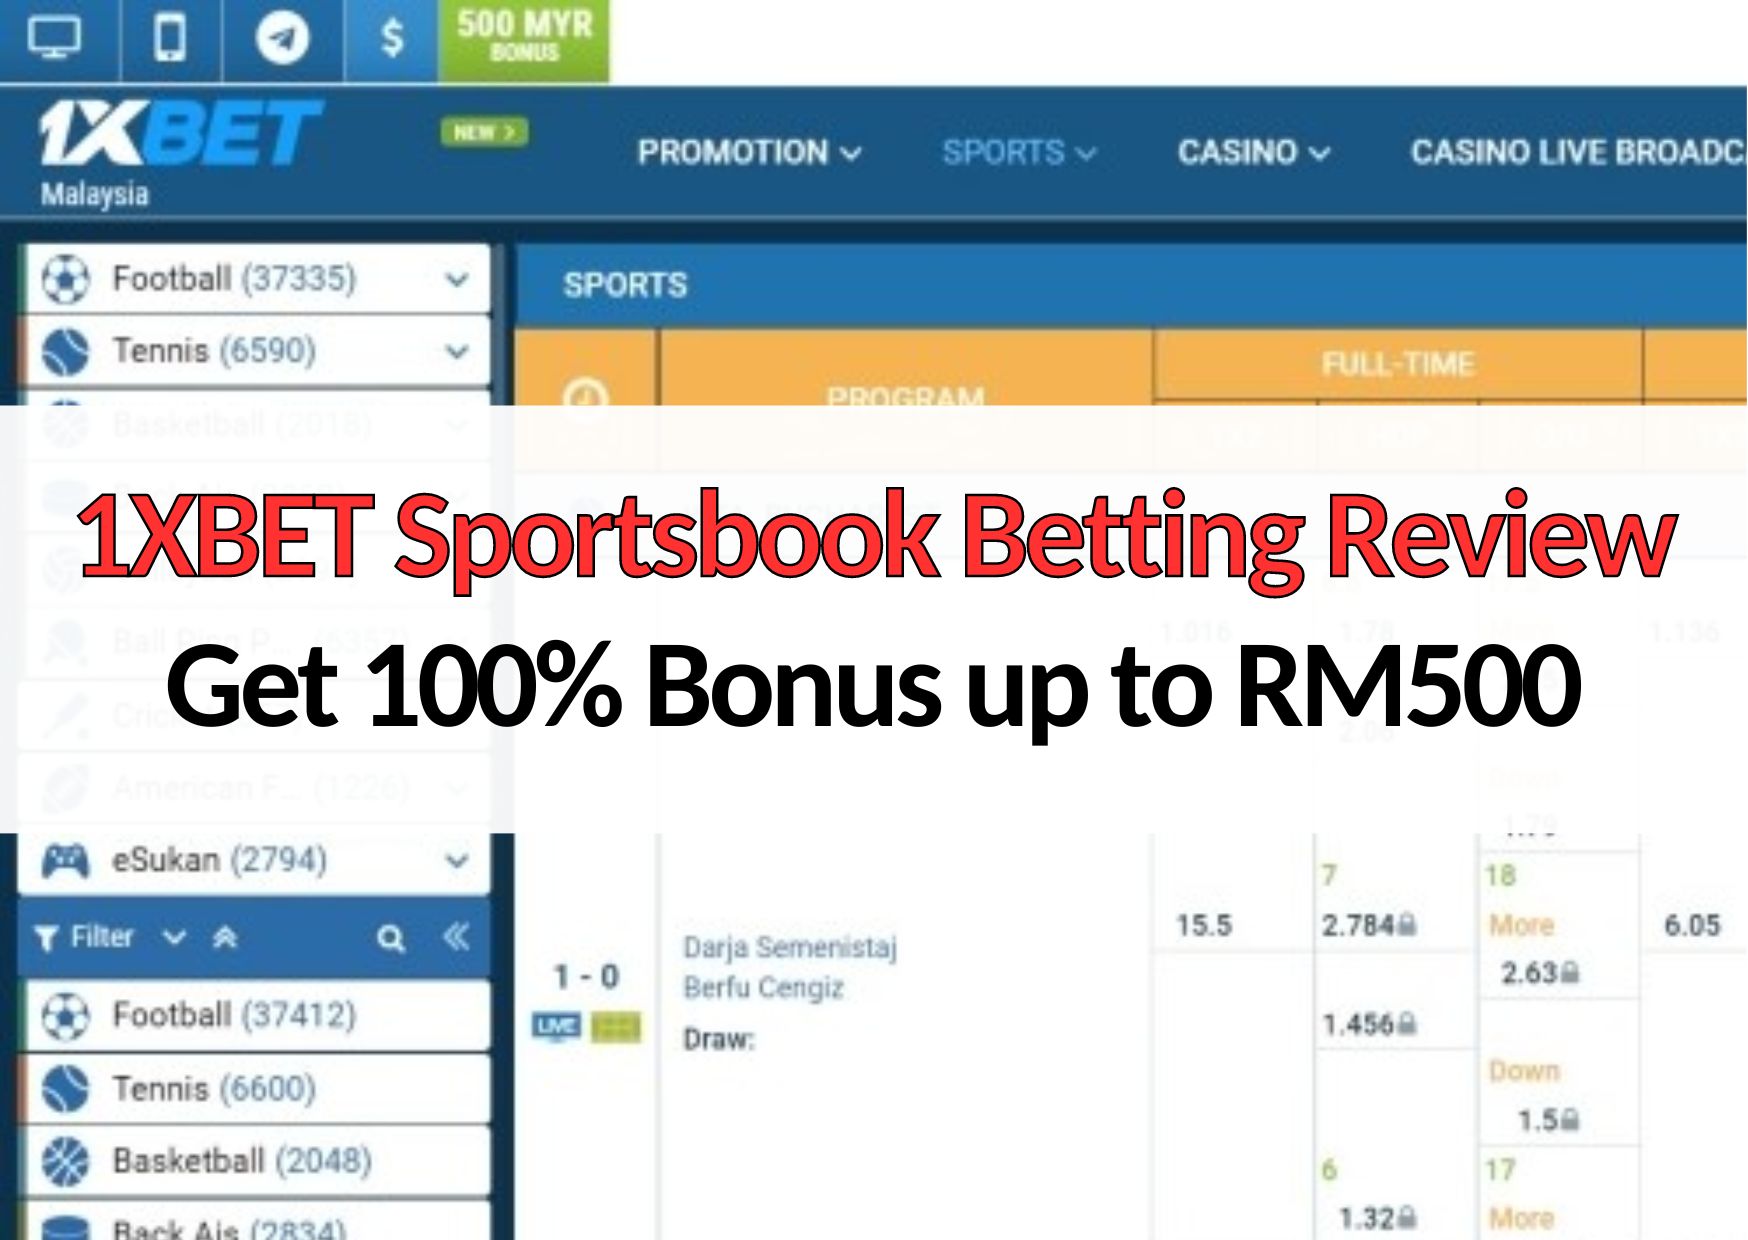 1xbet sportsbook review join to claim huge bonus